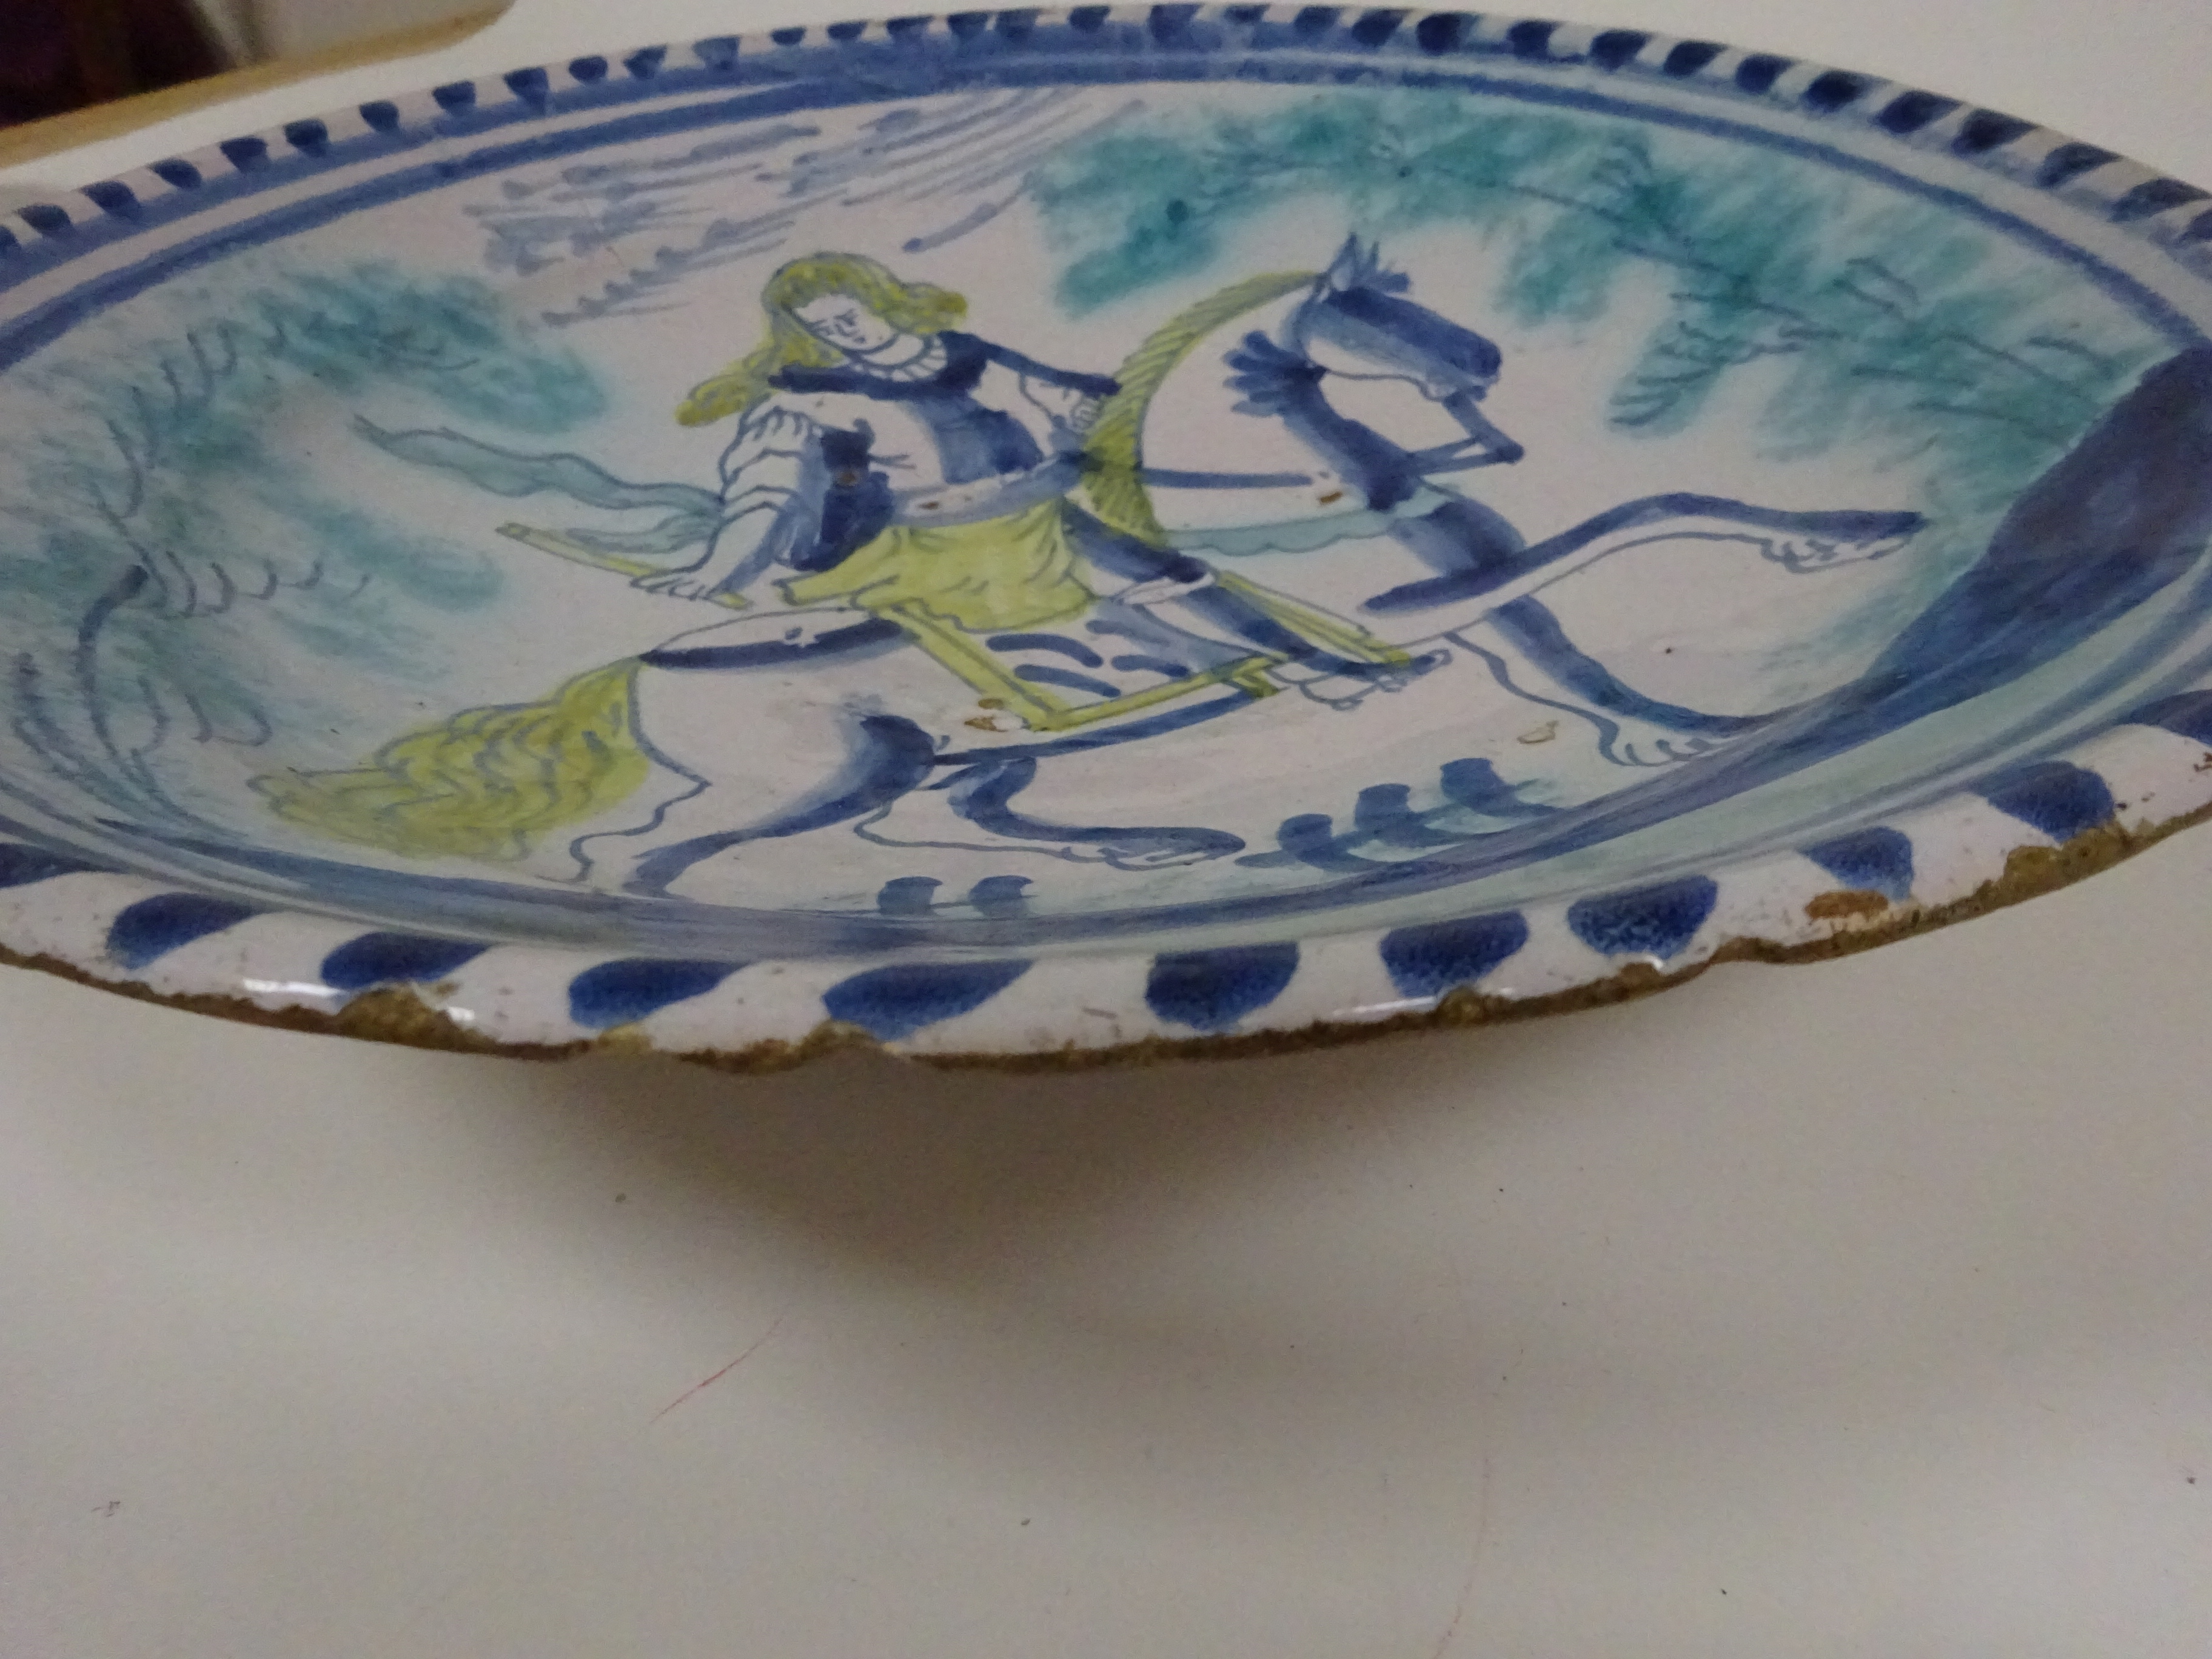 A DELFTWARE POTTERY EQUESTRIAN CHARGER PROBABLY LONDON, C.1700 painted in blue, green and yellow - Image 15 of 21